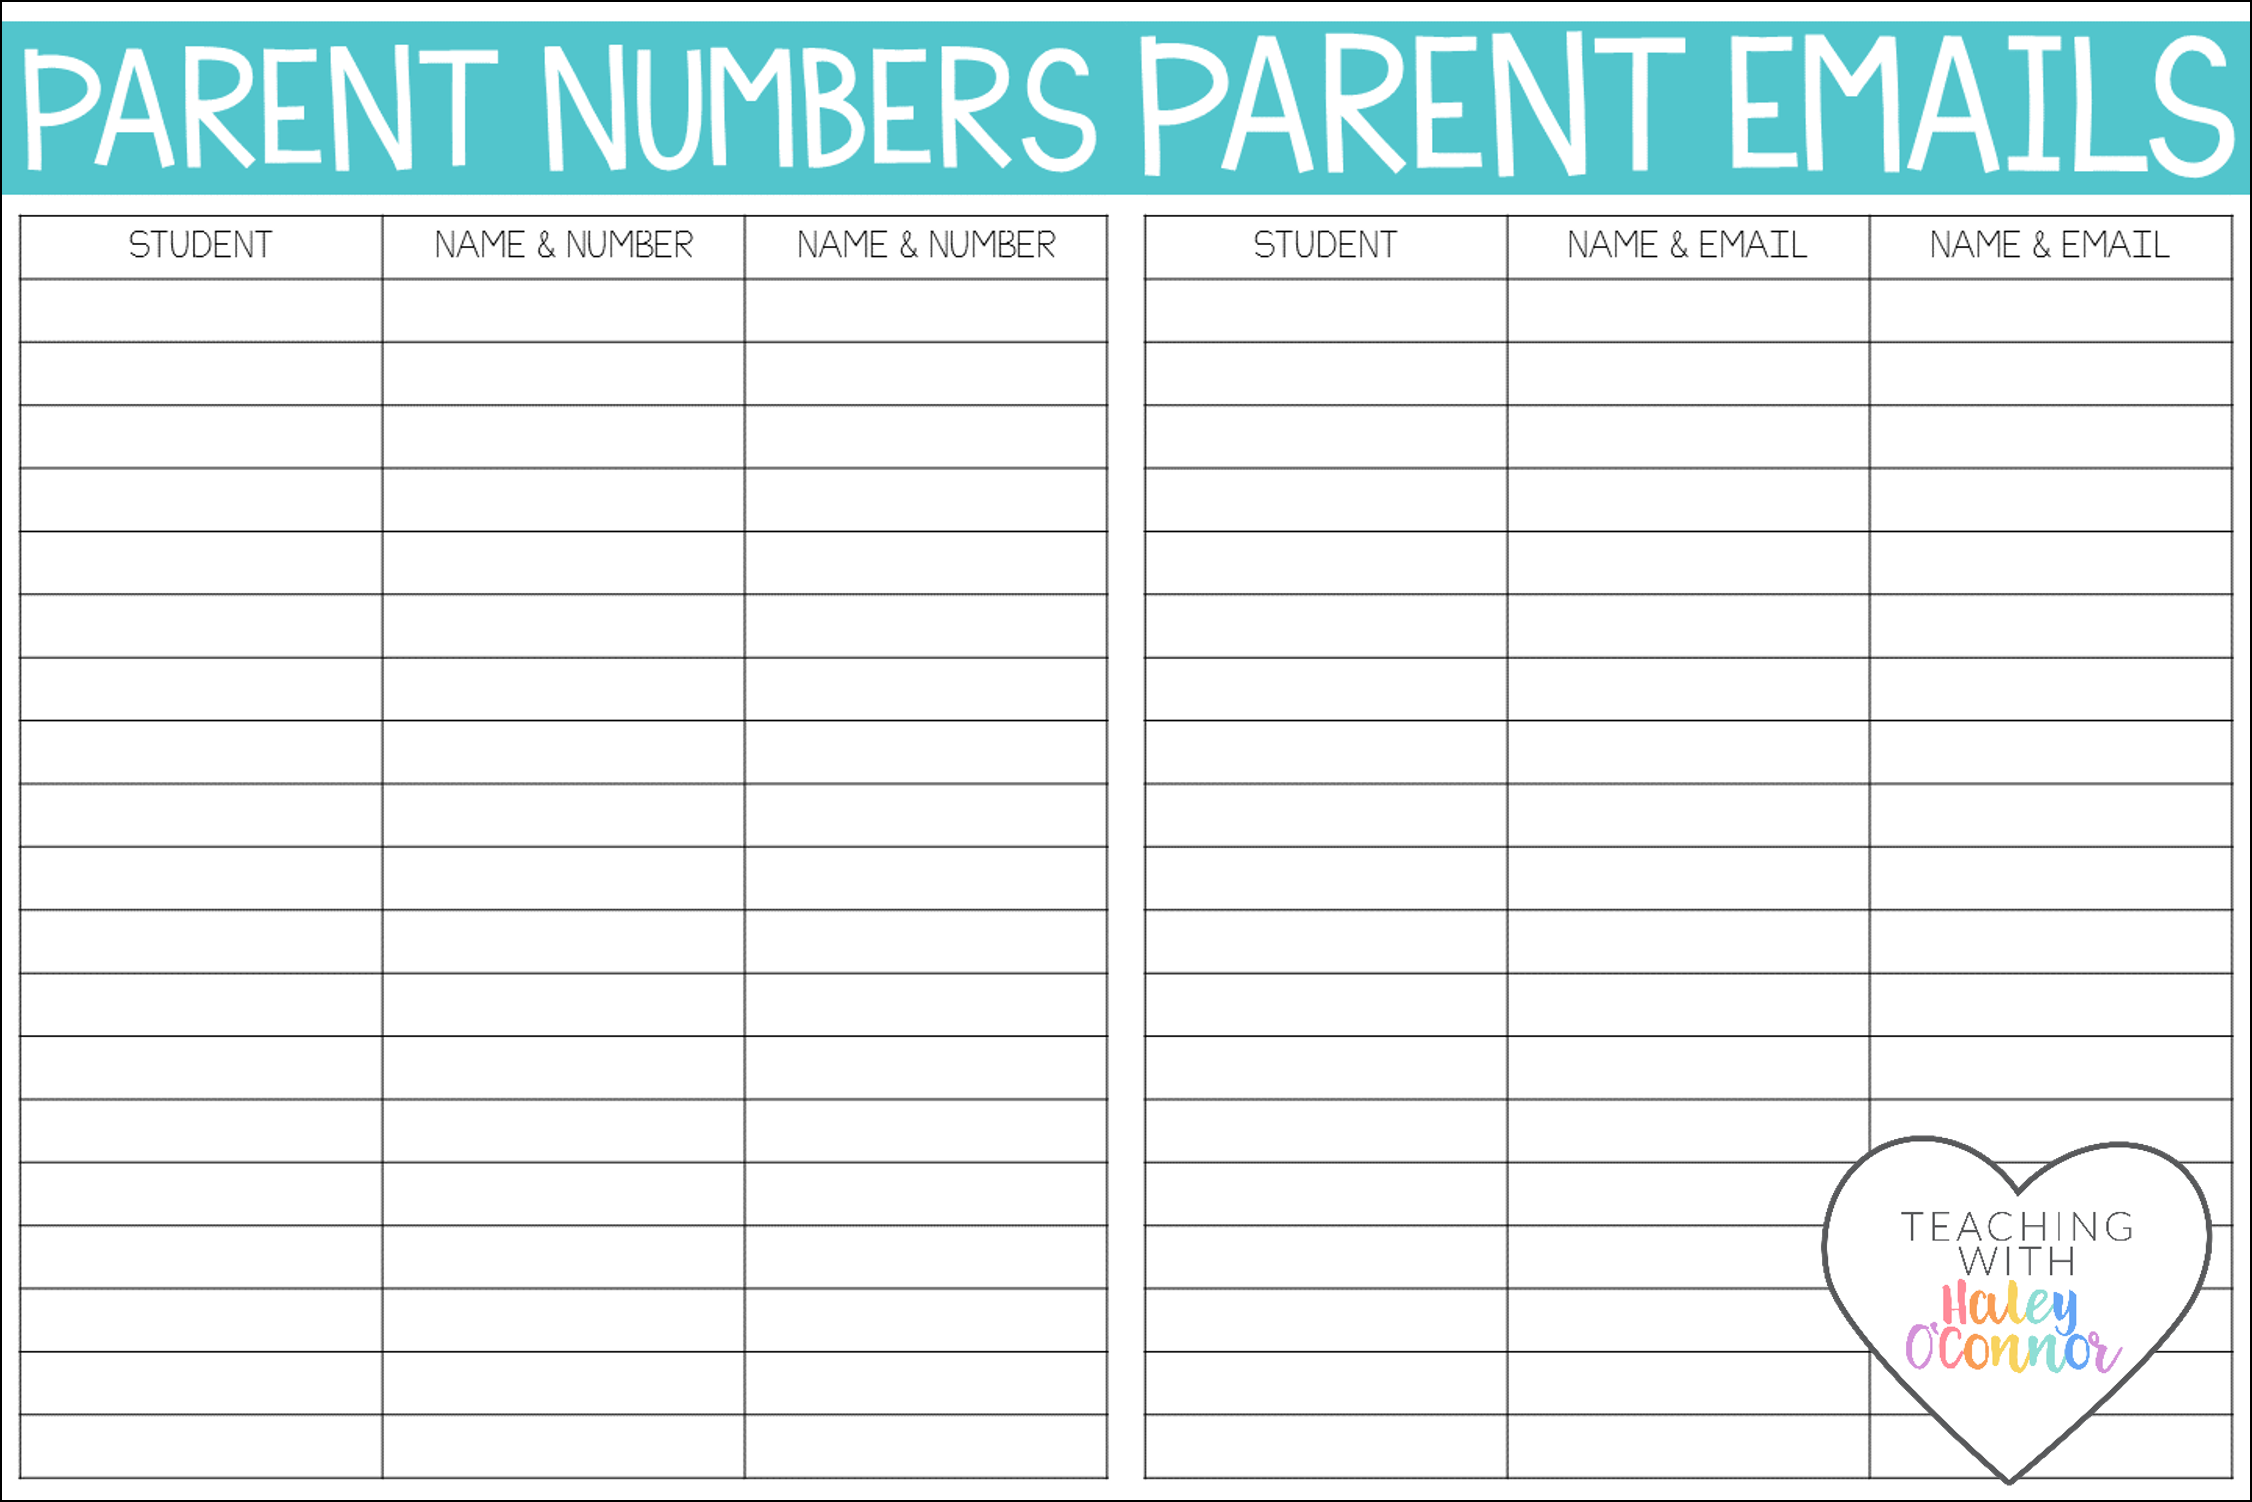 Parent Contact Information Forms for Teachers by Haley O'Connor